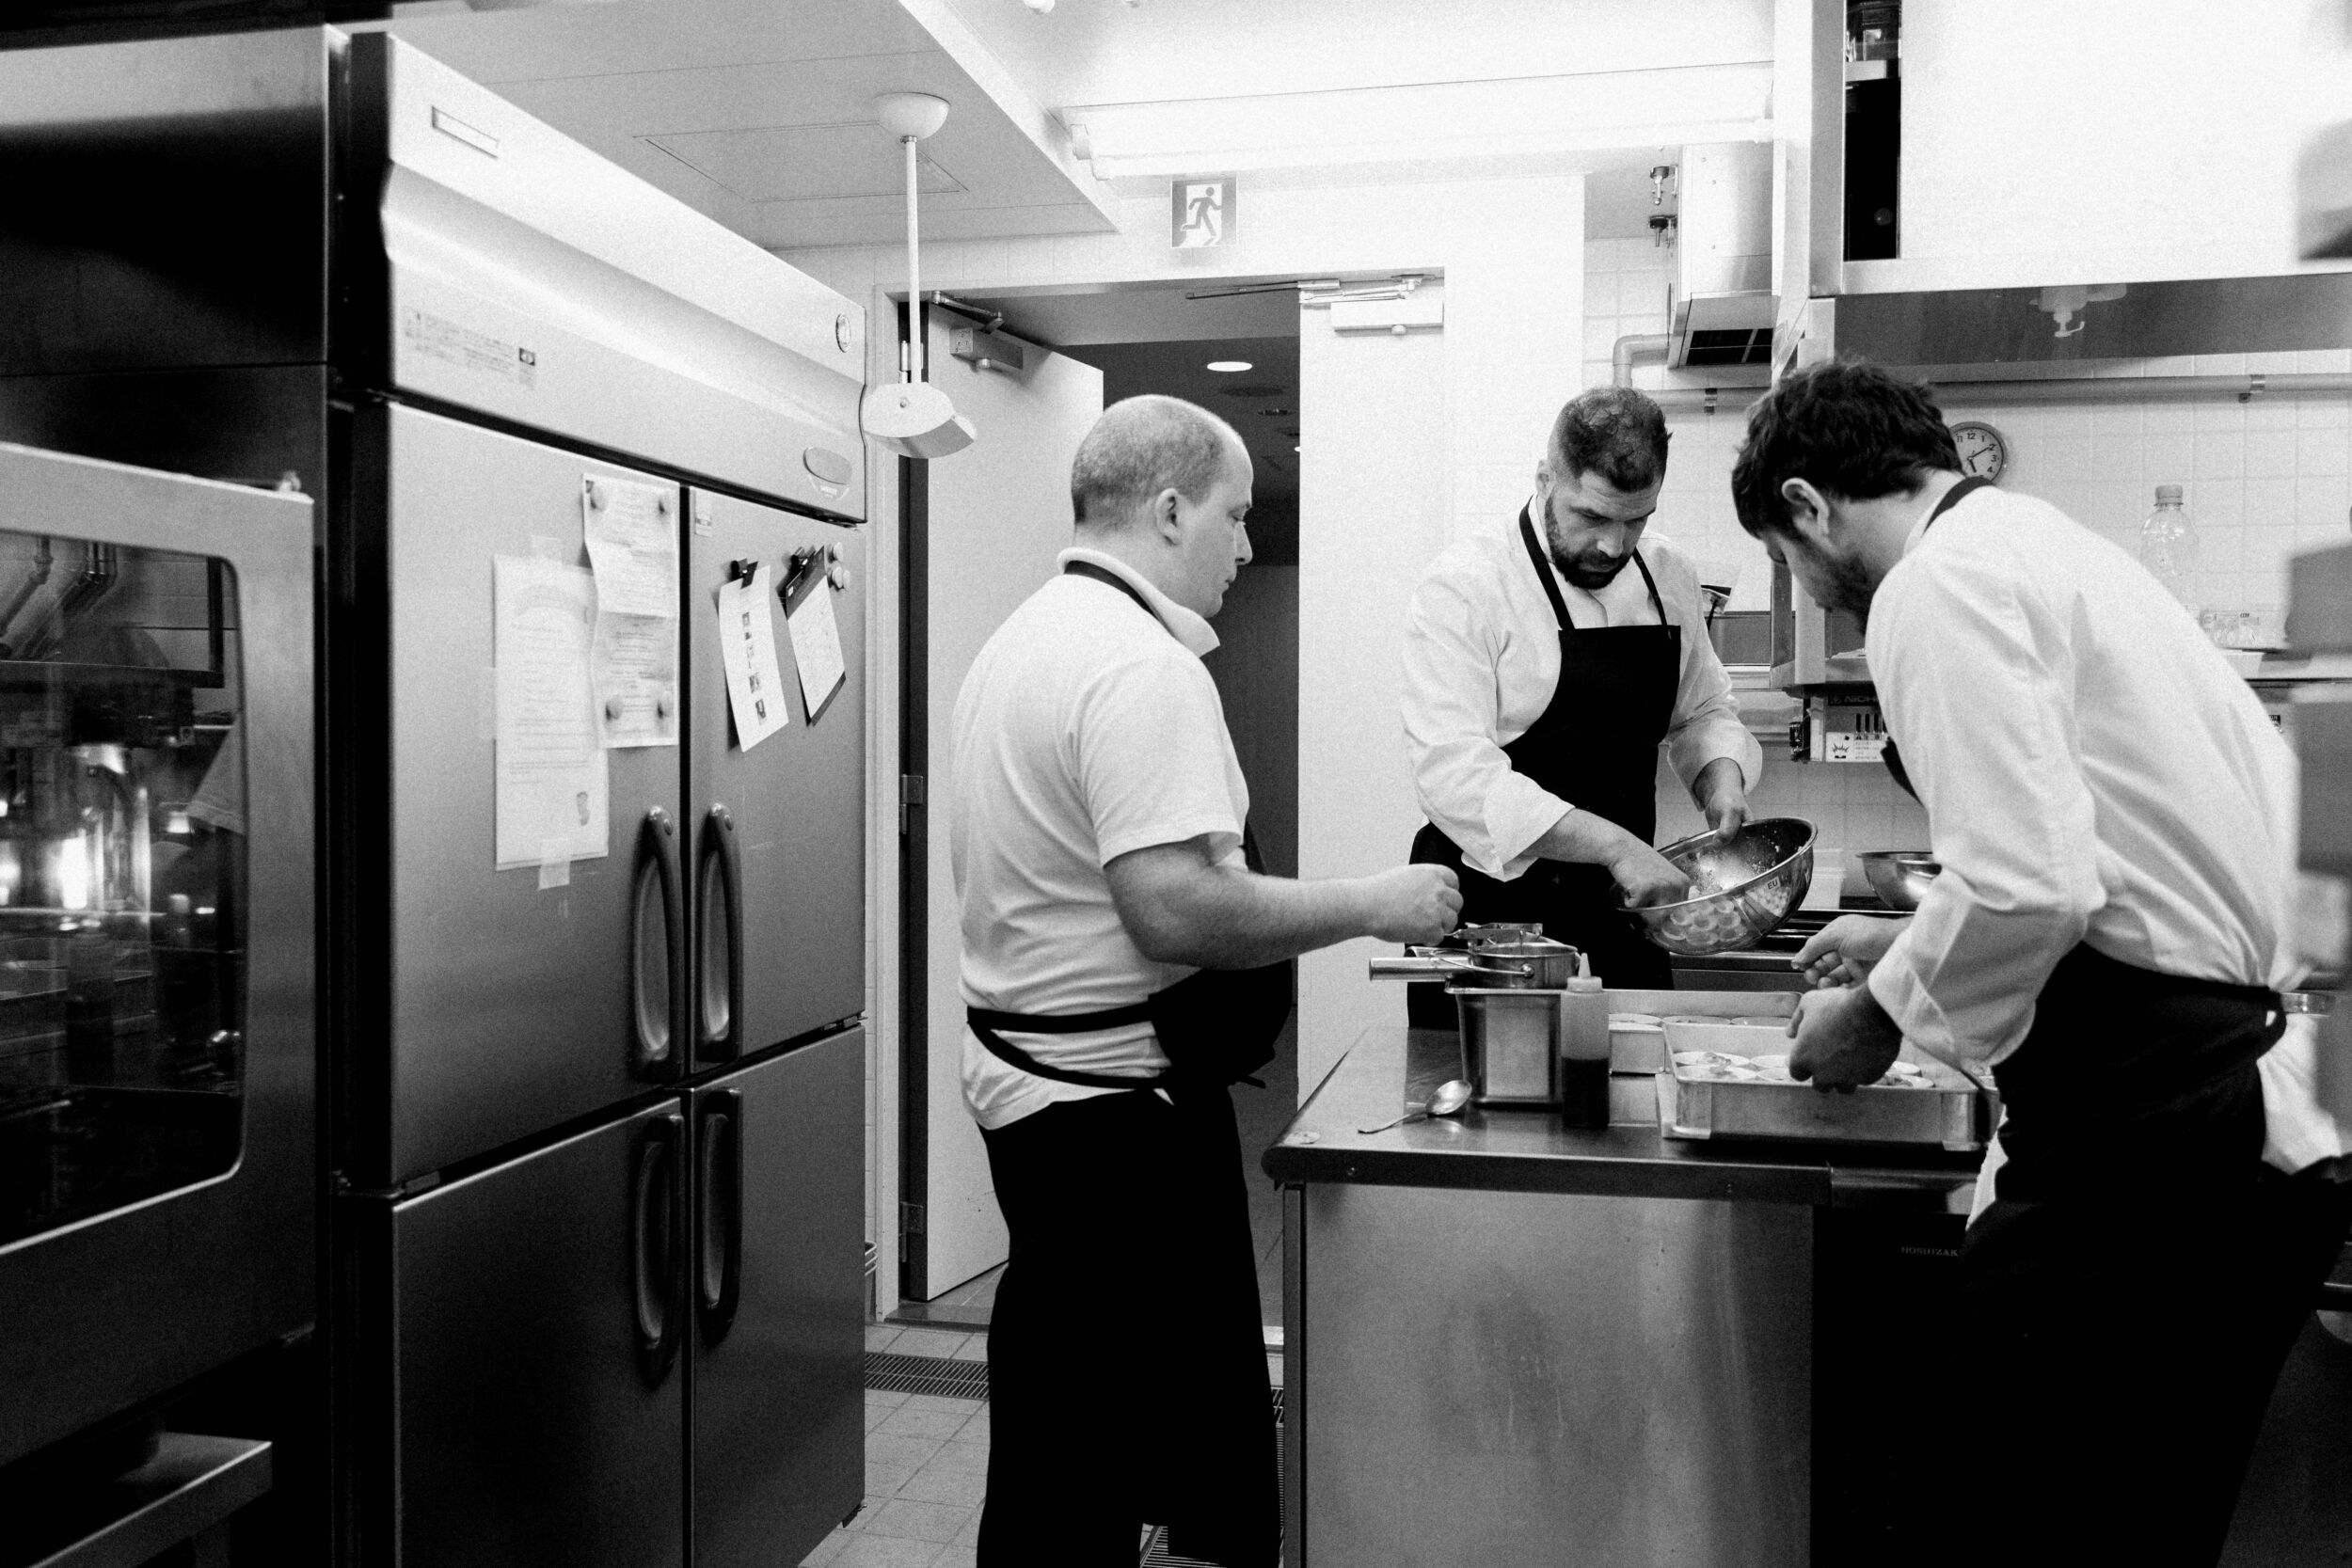 Black & White Shot of the Catering staff preparing food inside a hotel kitchen - Event photographer, Tokyo Event Photography